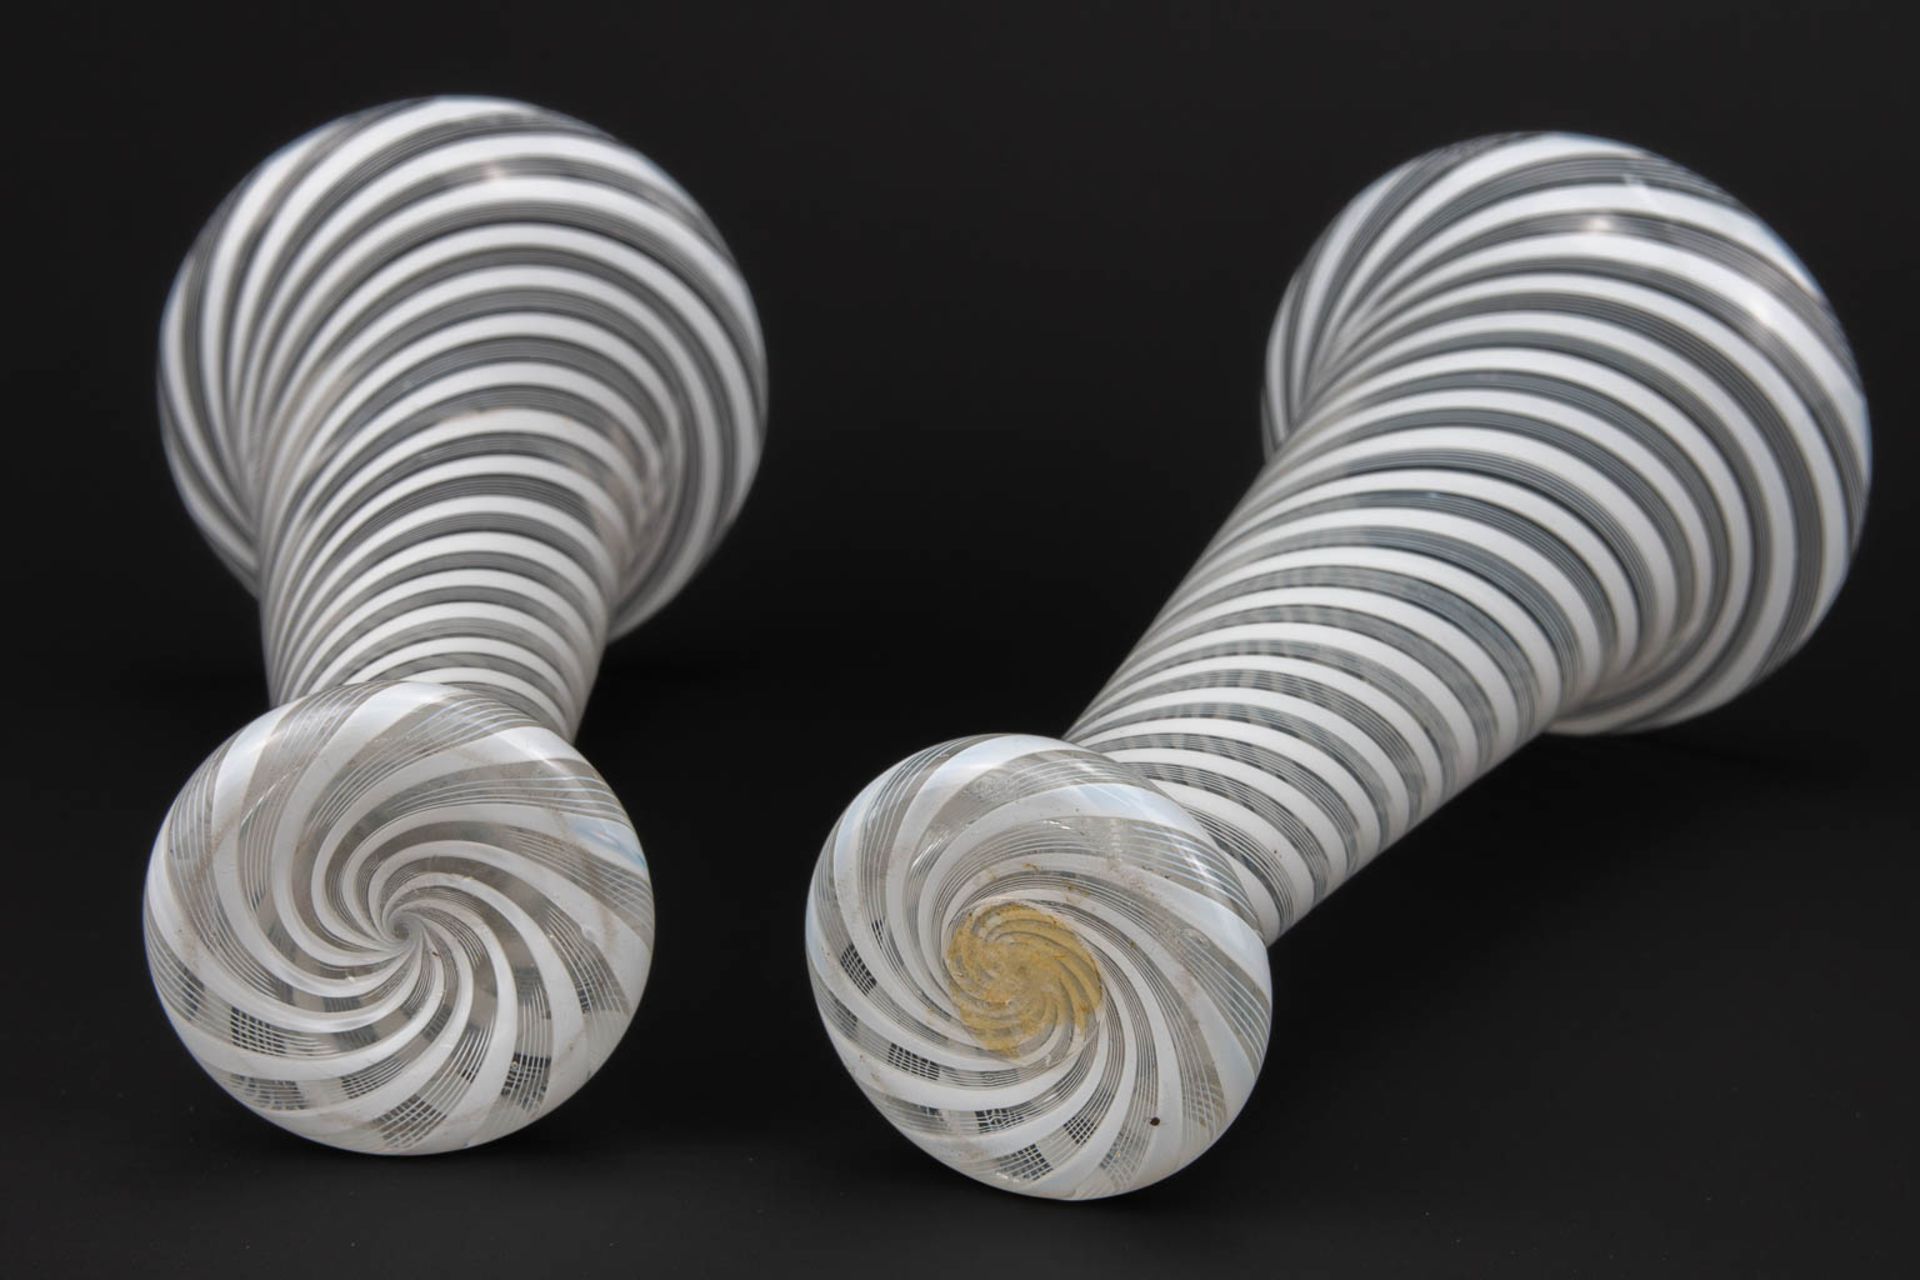 A pair of vases made of glass in Murano, Italy, around 1900. (16 x 7 cm) - Image 6 of 11